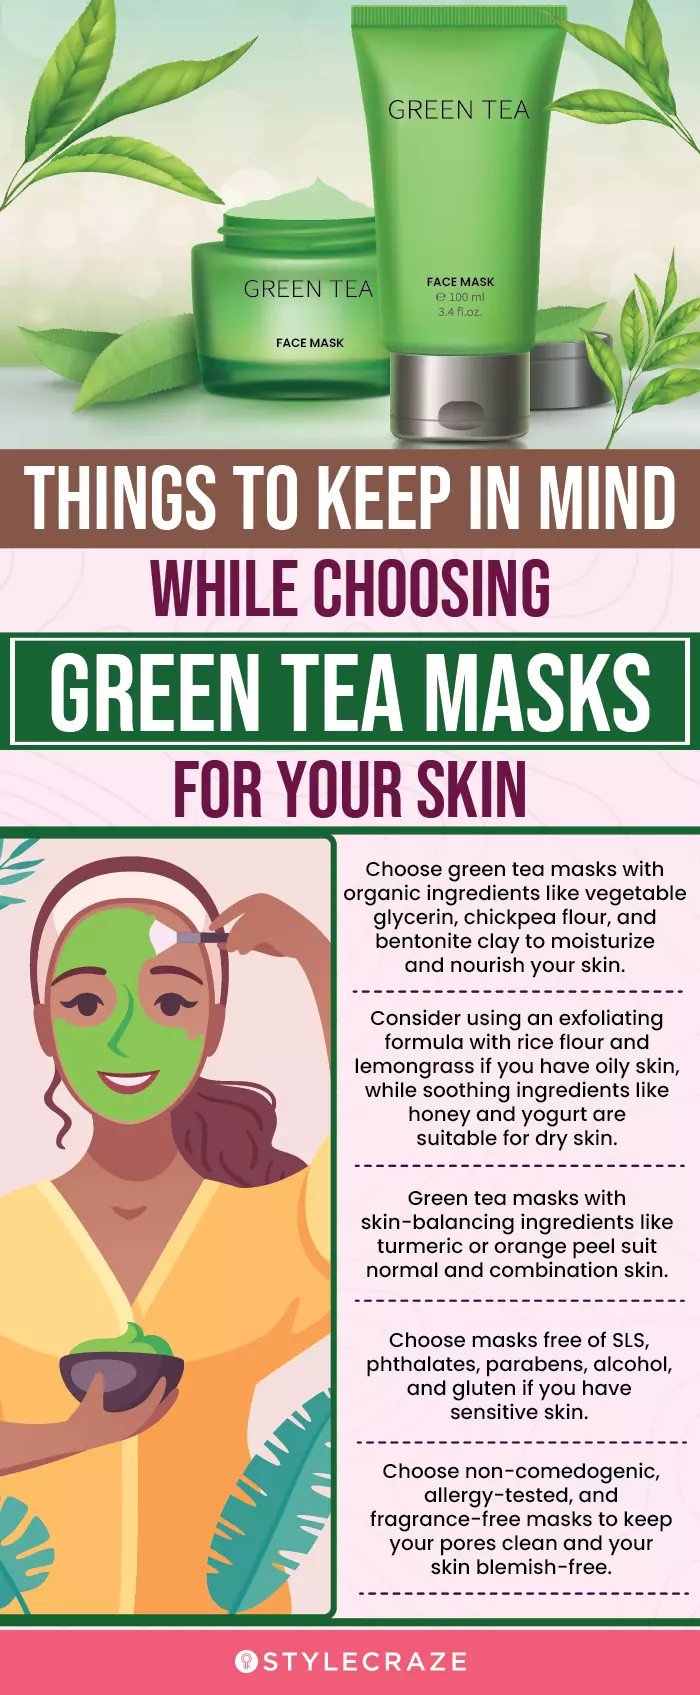 Things To Keep In Mind While Choosing Green Tea Masks For Your Skin (infographic)